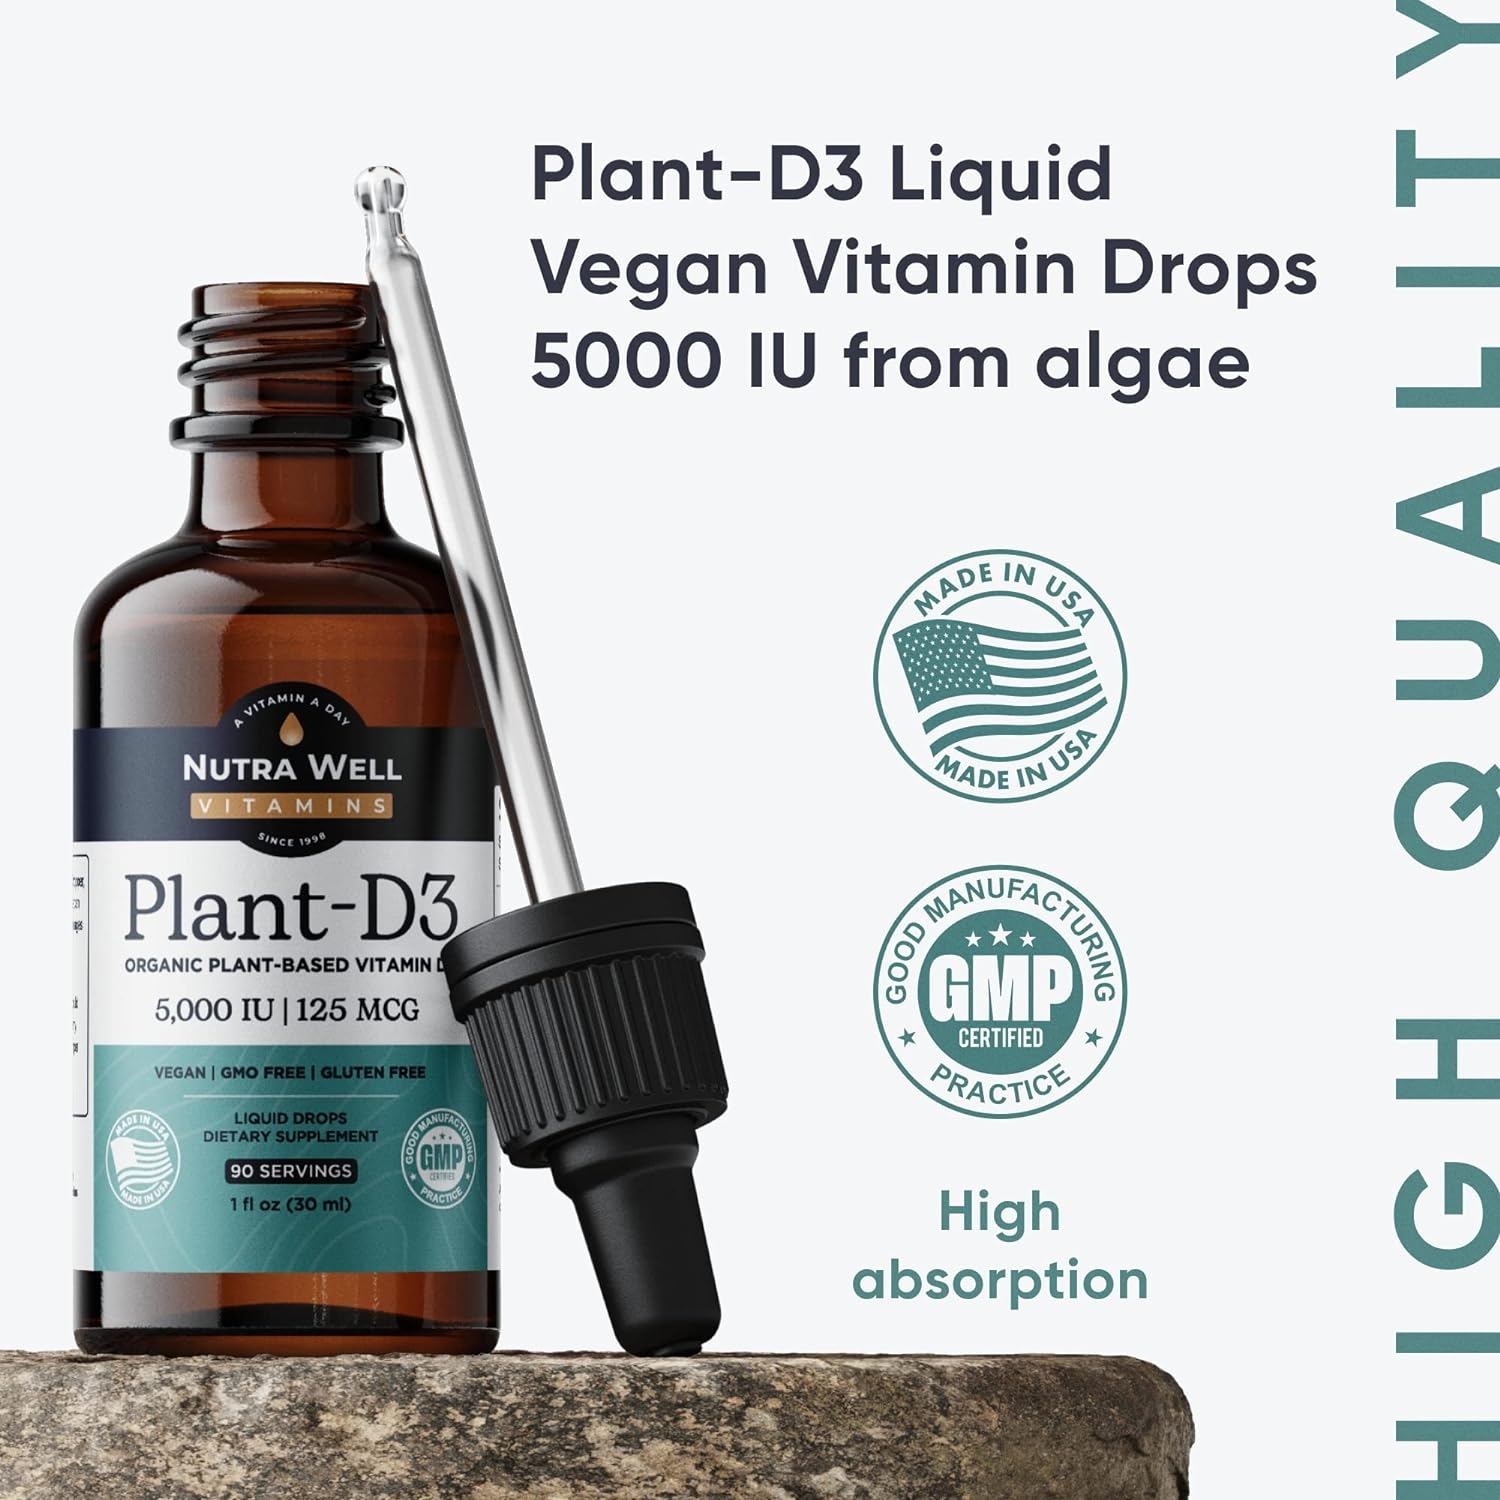 Vitamin D3 Liquid Drops 5000 IU for Nervous System&Immune Support - Vegan Organic Plant-Based Vitamin D3 for All Ages Supplement - Non-GMO, Gluten Free (90 Servings)